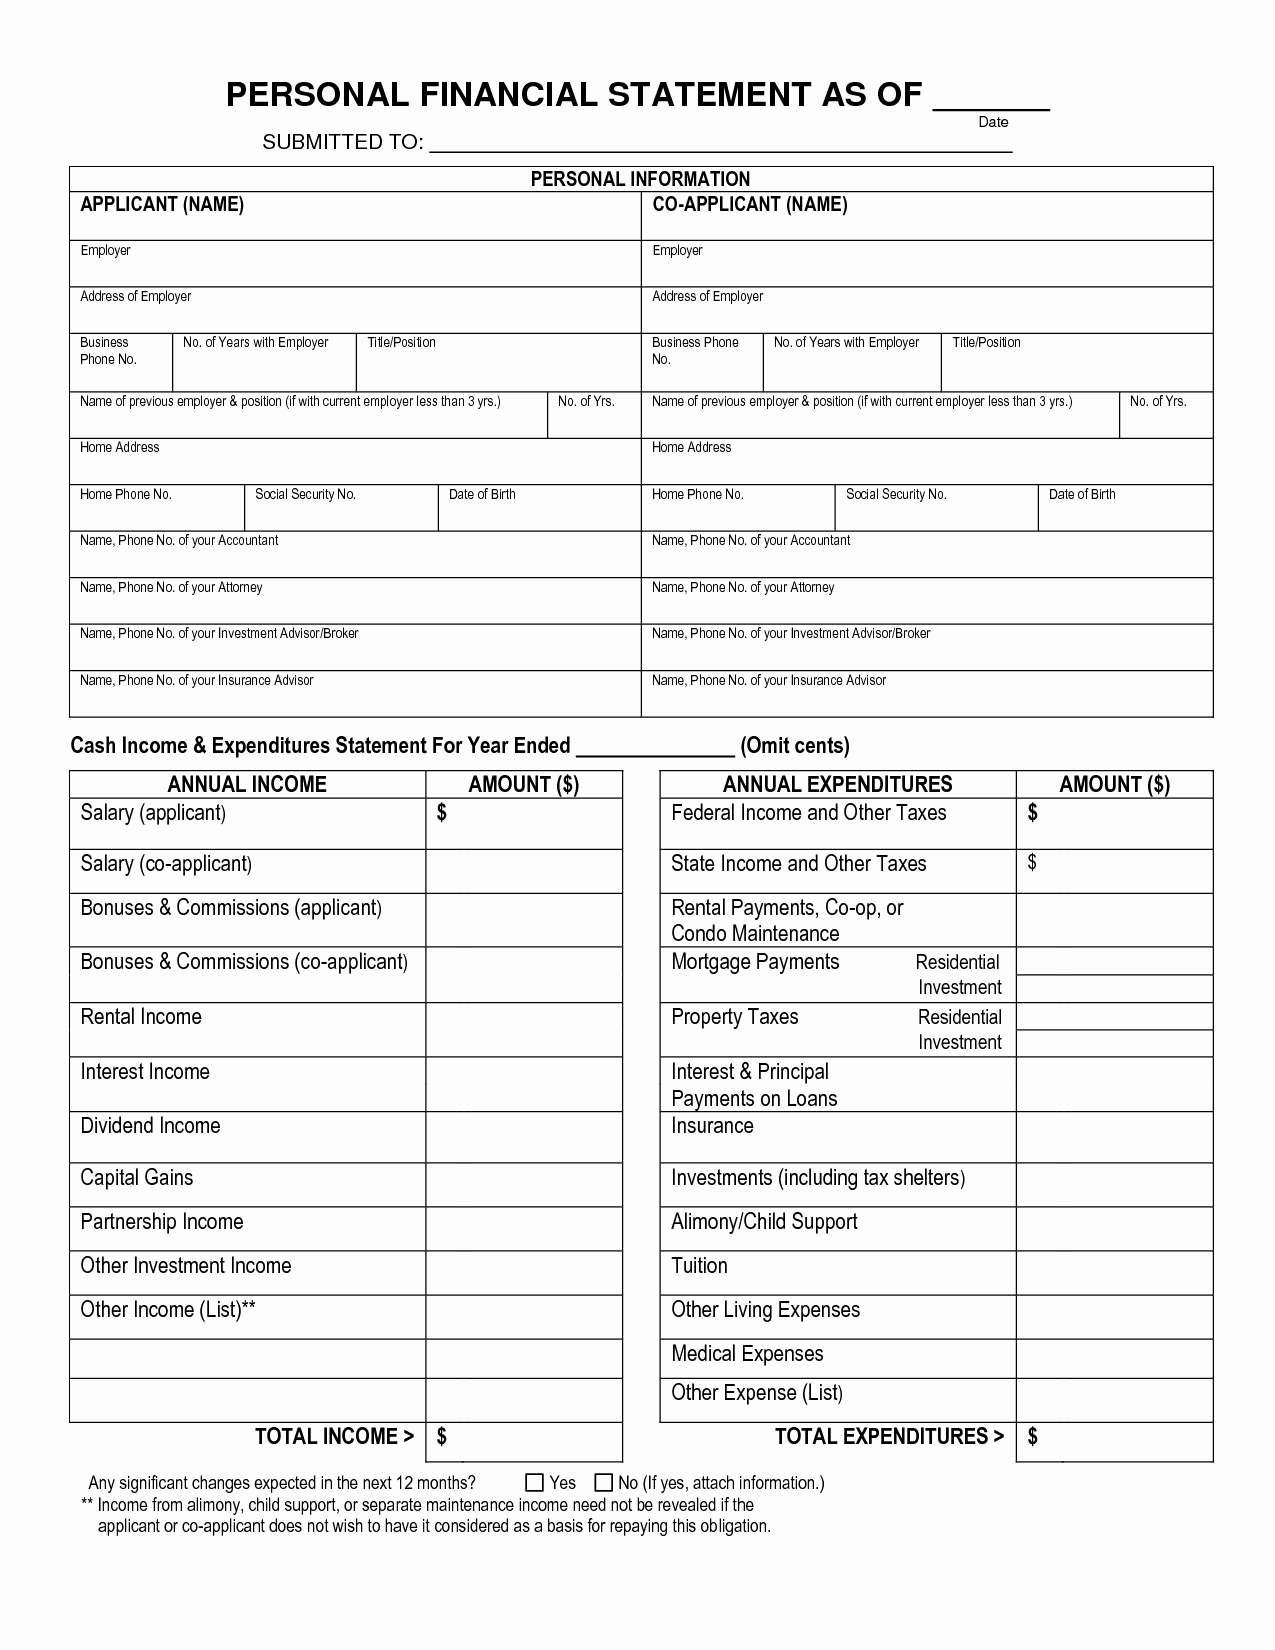 Personal Financial Statement Template Free Elegant Free Printable Personal Financial Statement